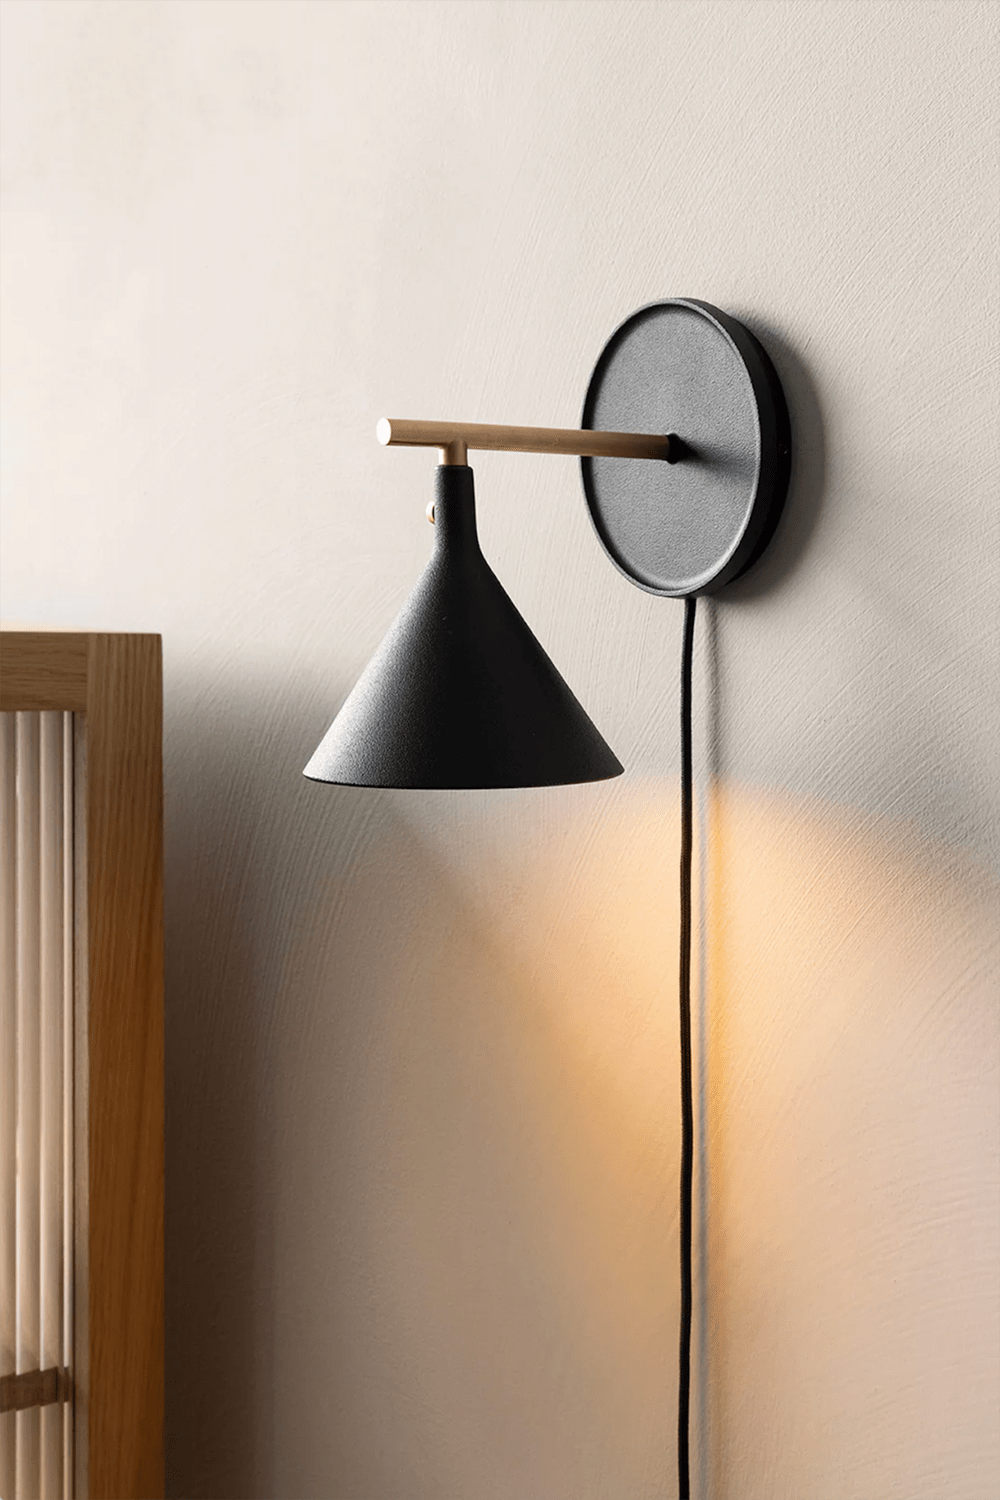 Cast Sconce Wall Lamp Diffuser, dimmer by Menu.